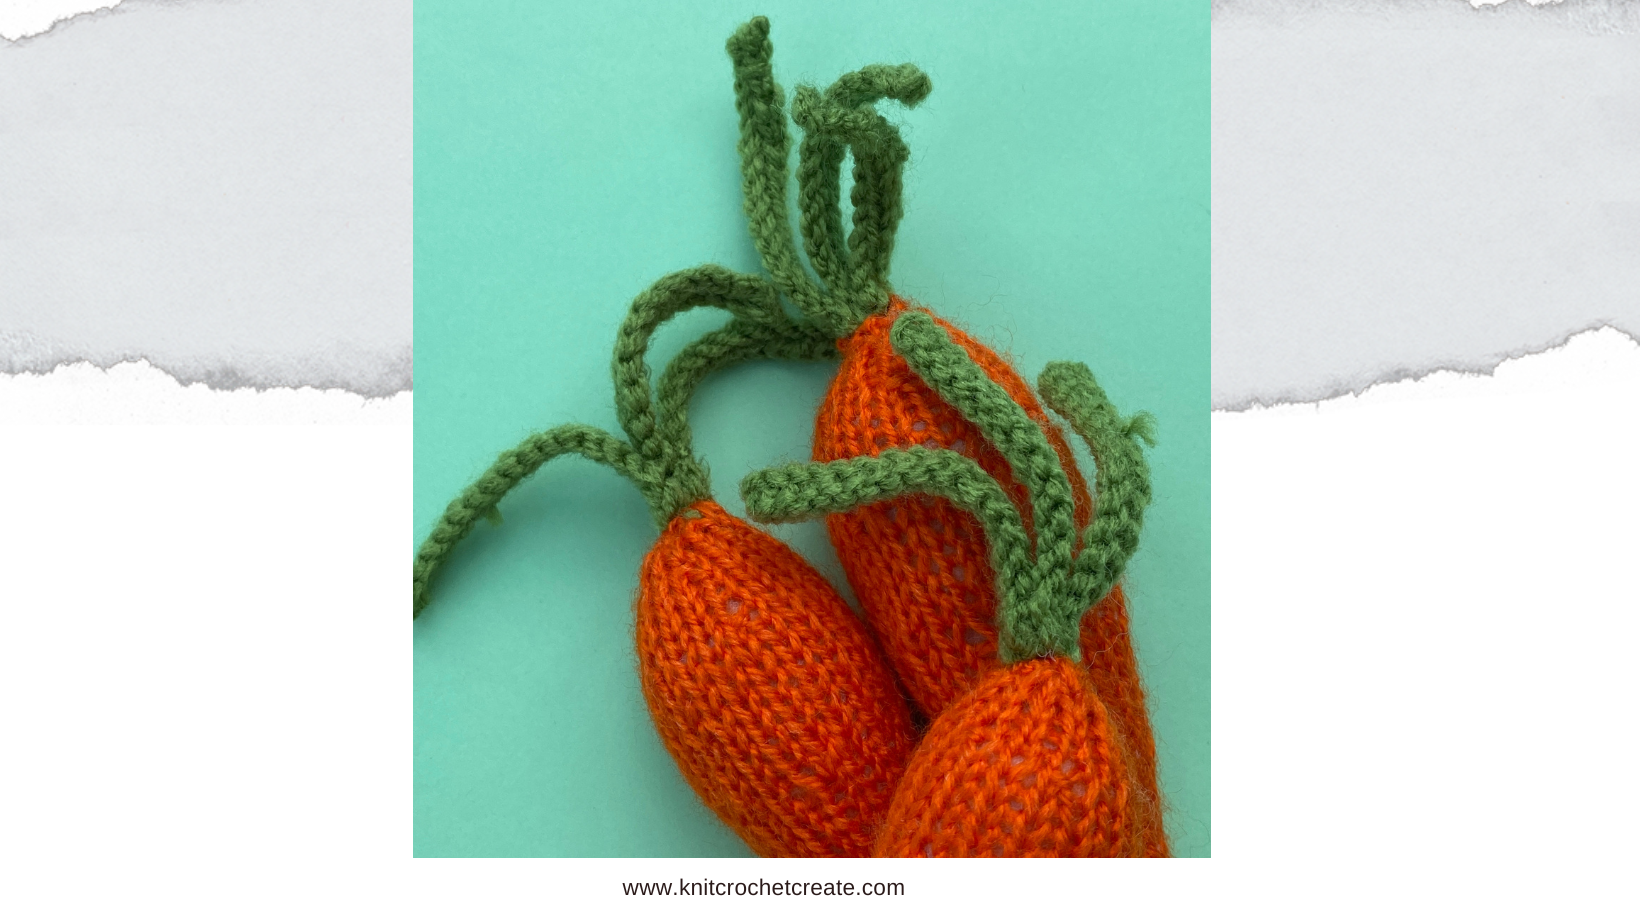 knitted carrots with orange yarn for main carrot, green for stalks. Made from my free knitted carrots pattern